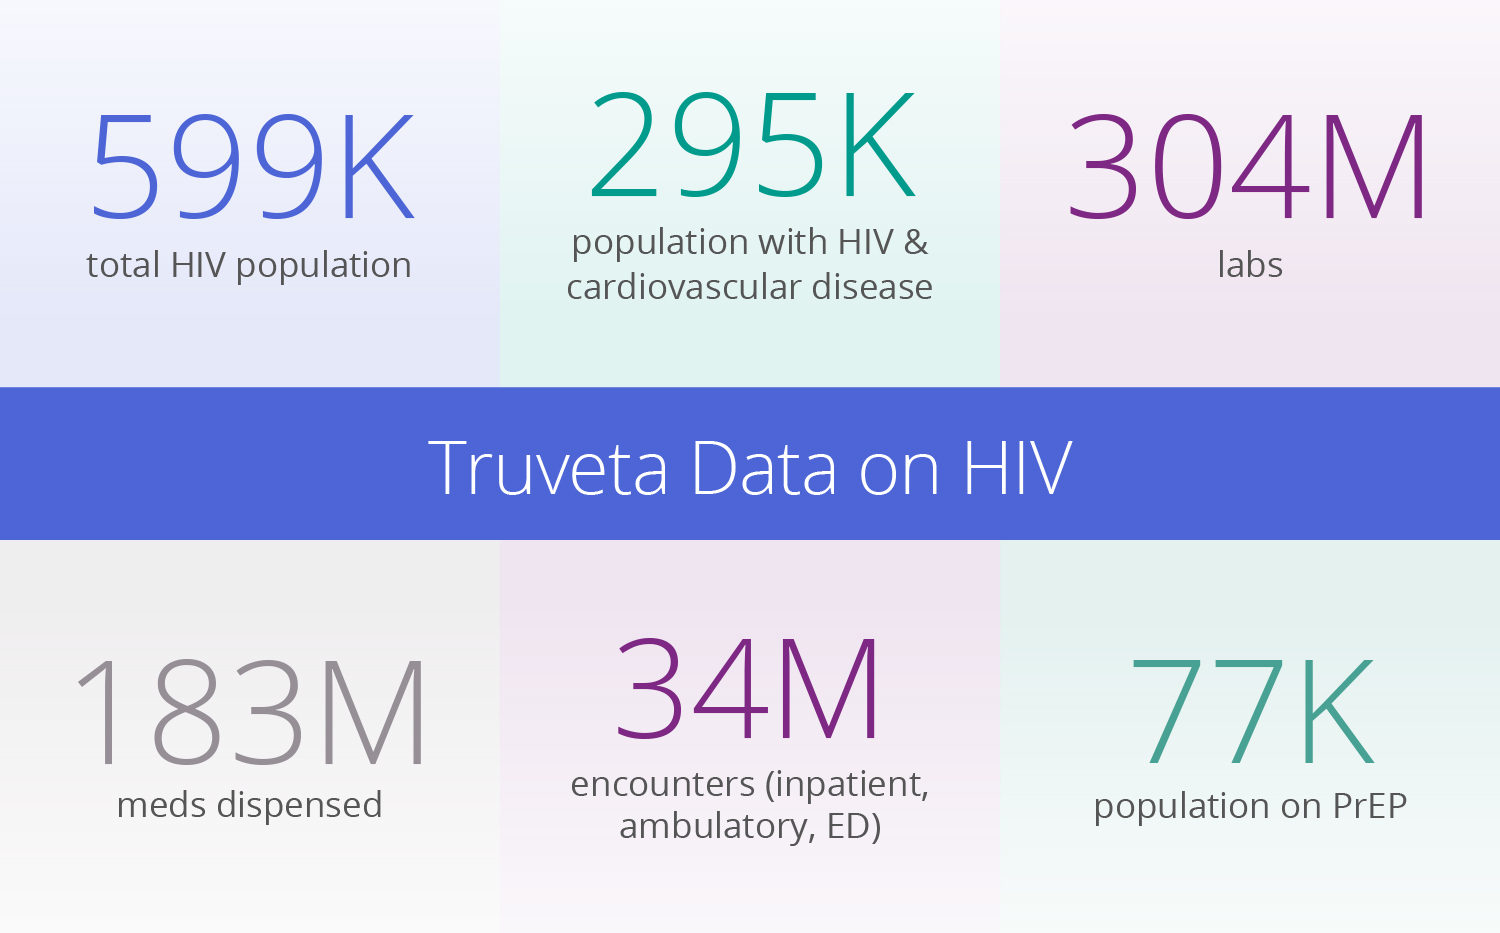 Truveta Data on HIV: Using EHR data for analytics to end the HIV epidemic. Learn more from a leading health data company, Truveta